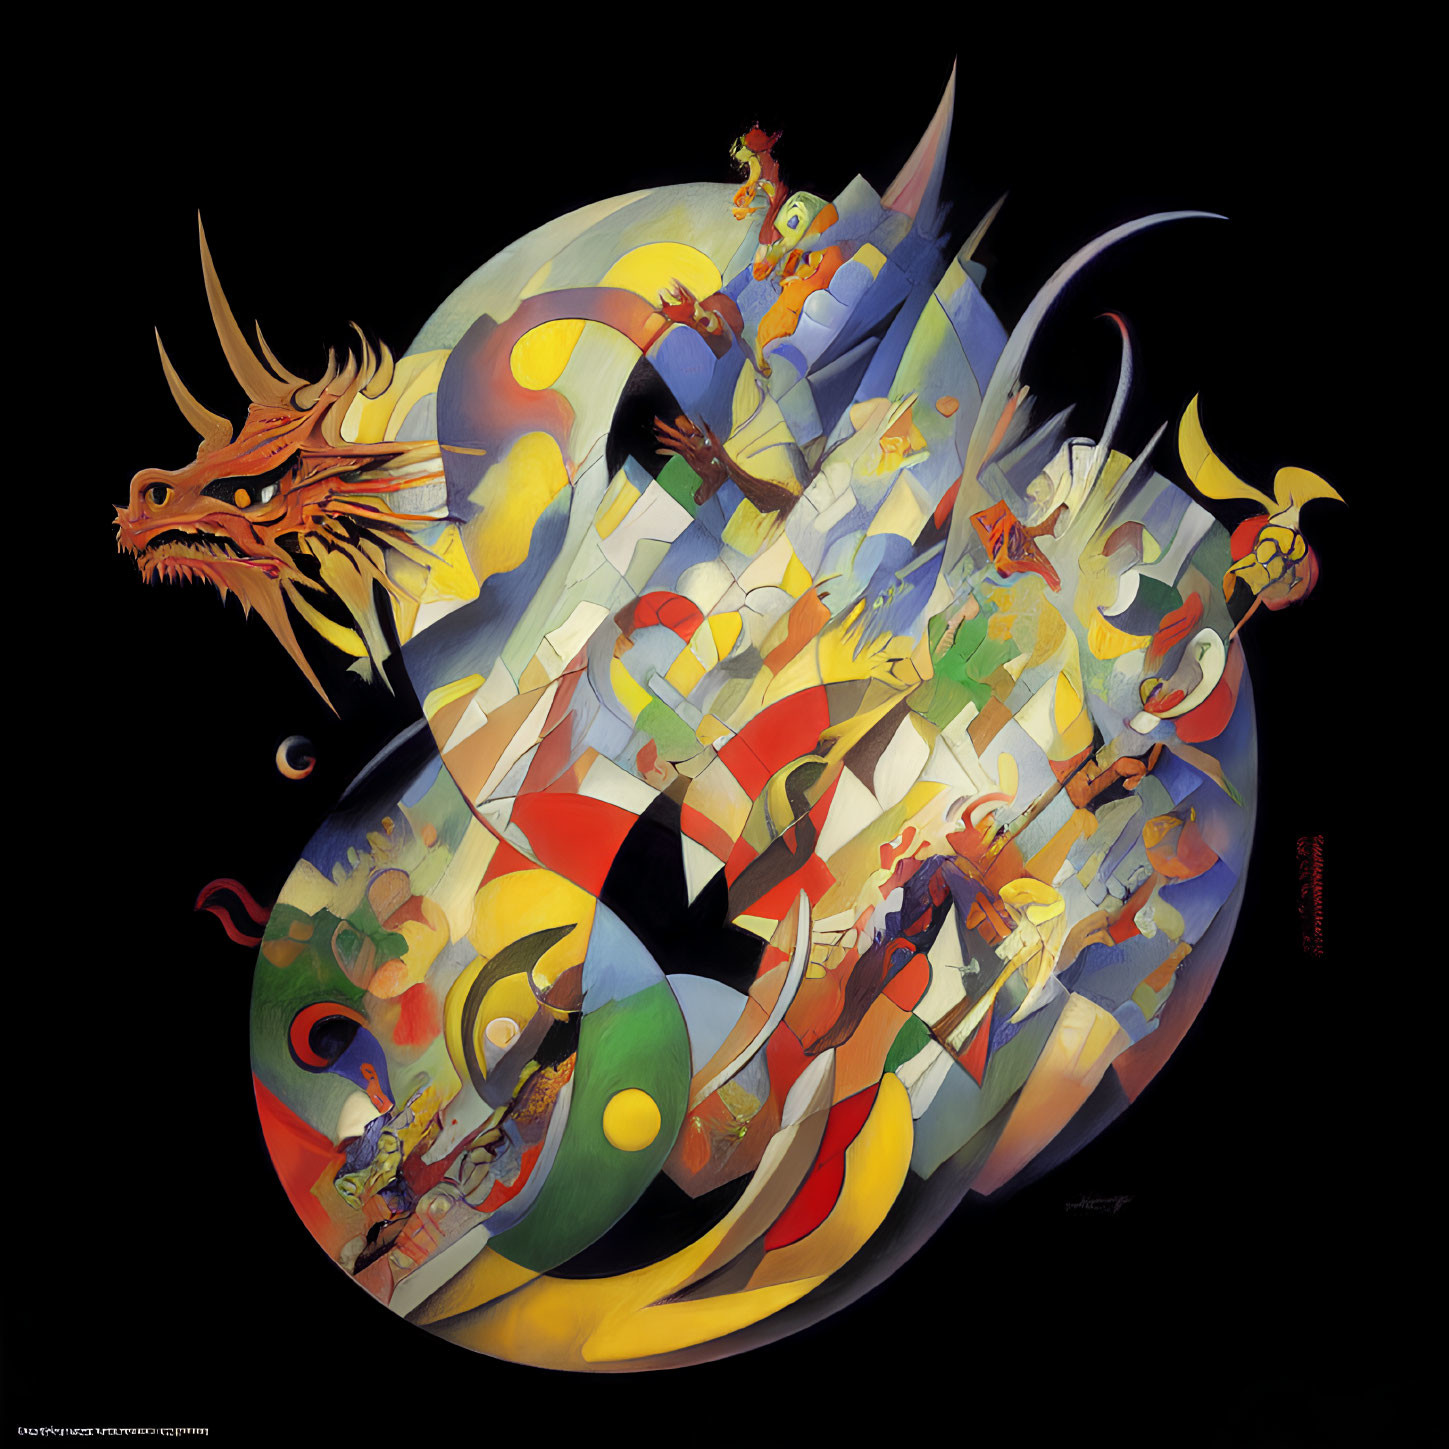 Colorful abstract dragon art with geometric shapes blend